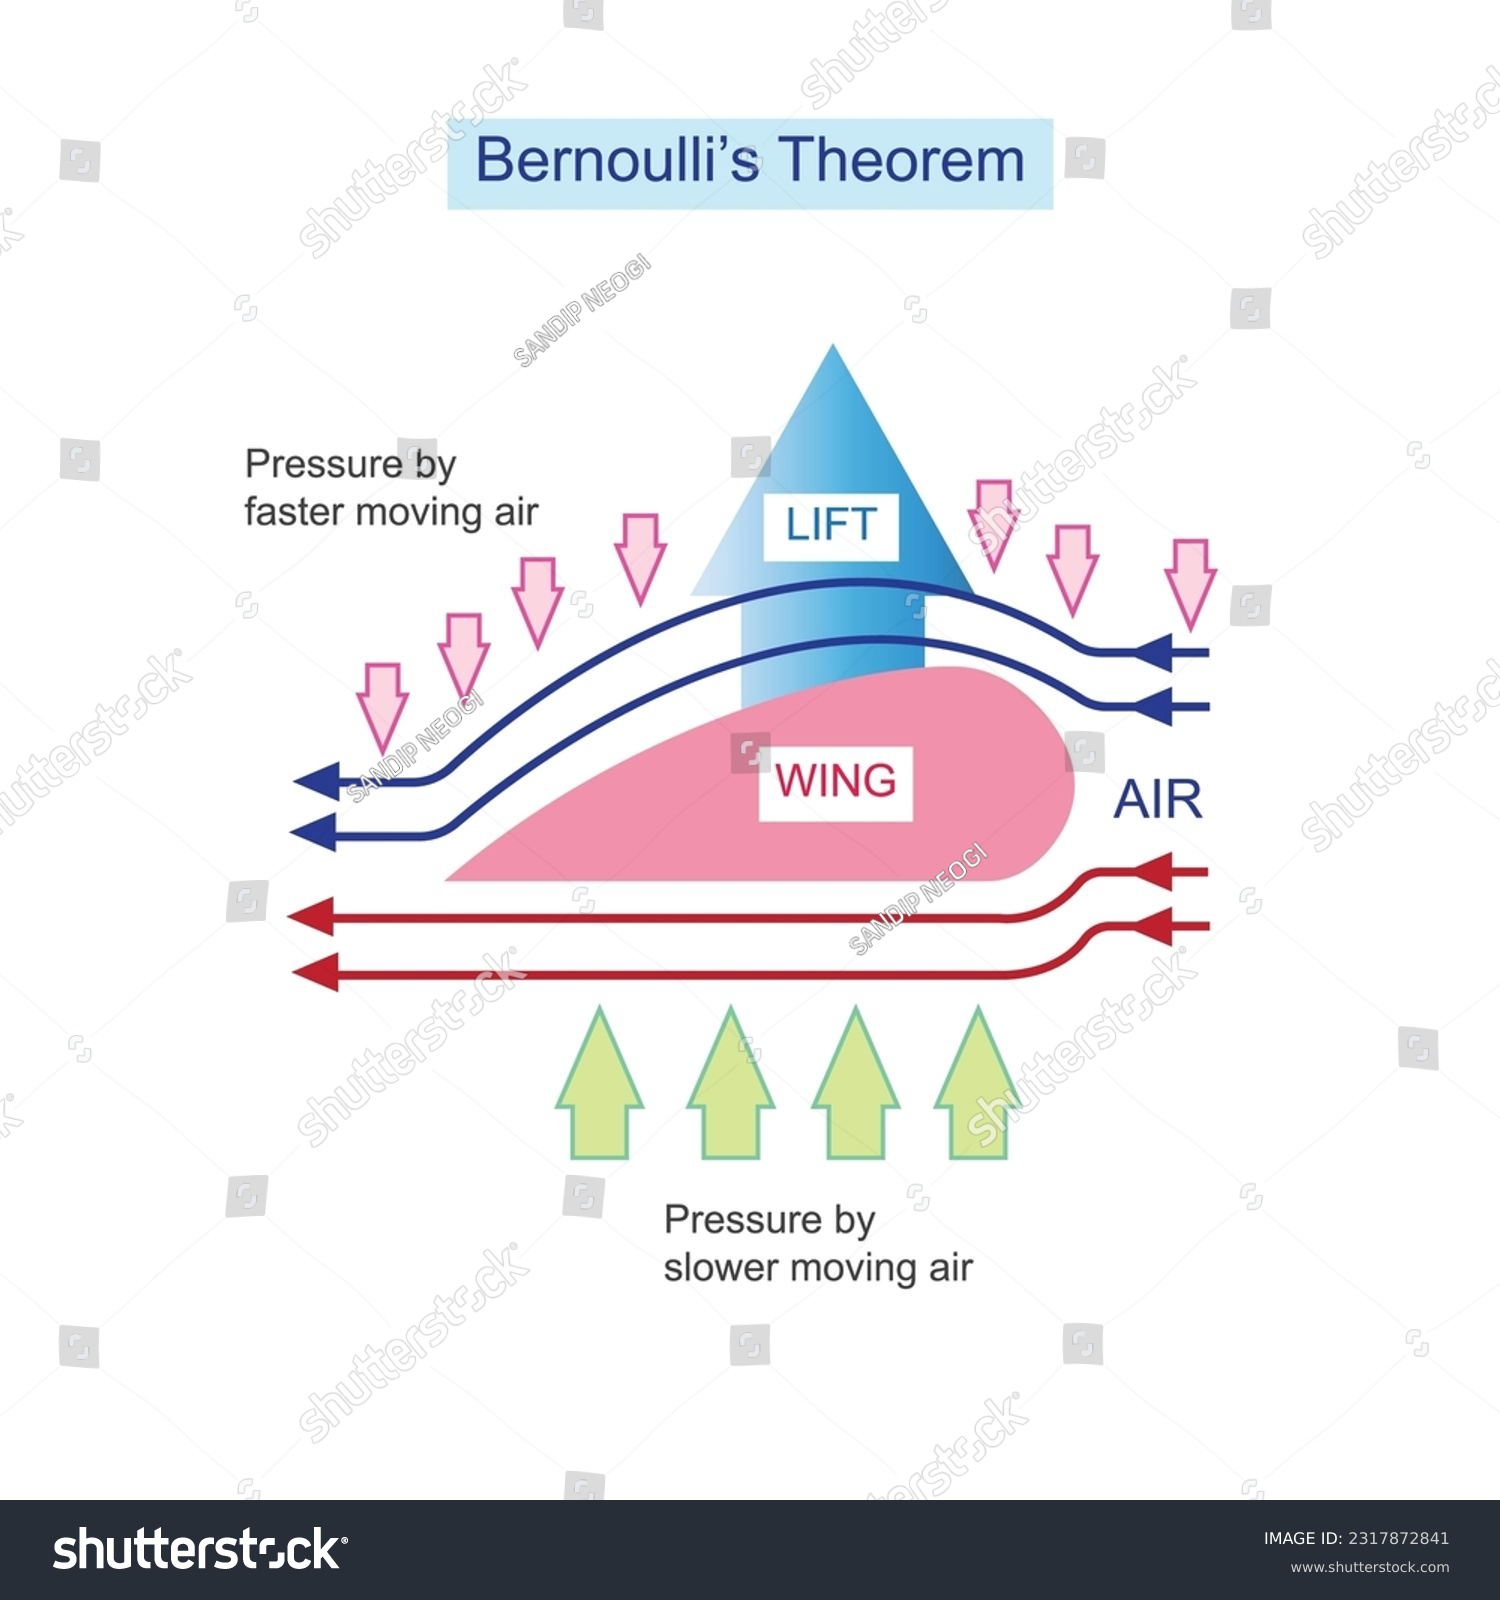 SVG of Bernoulli theorem explains how the difference in air pressure above and below the wings allows airplanes to generate lift and fly. svg